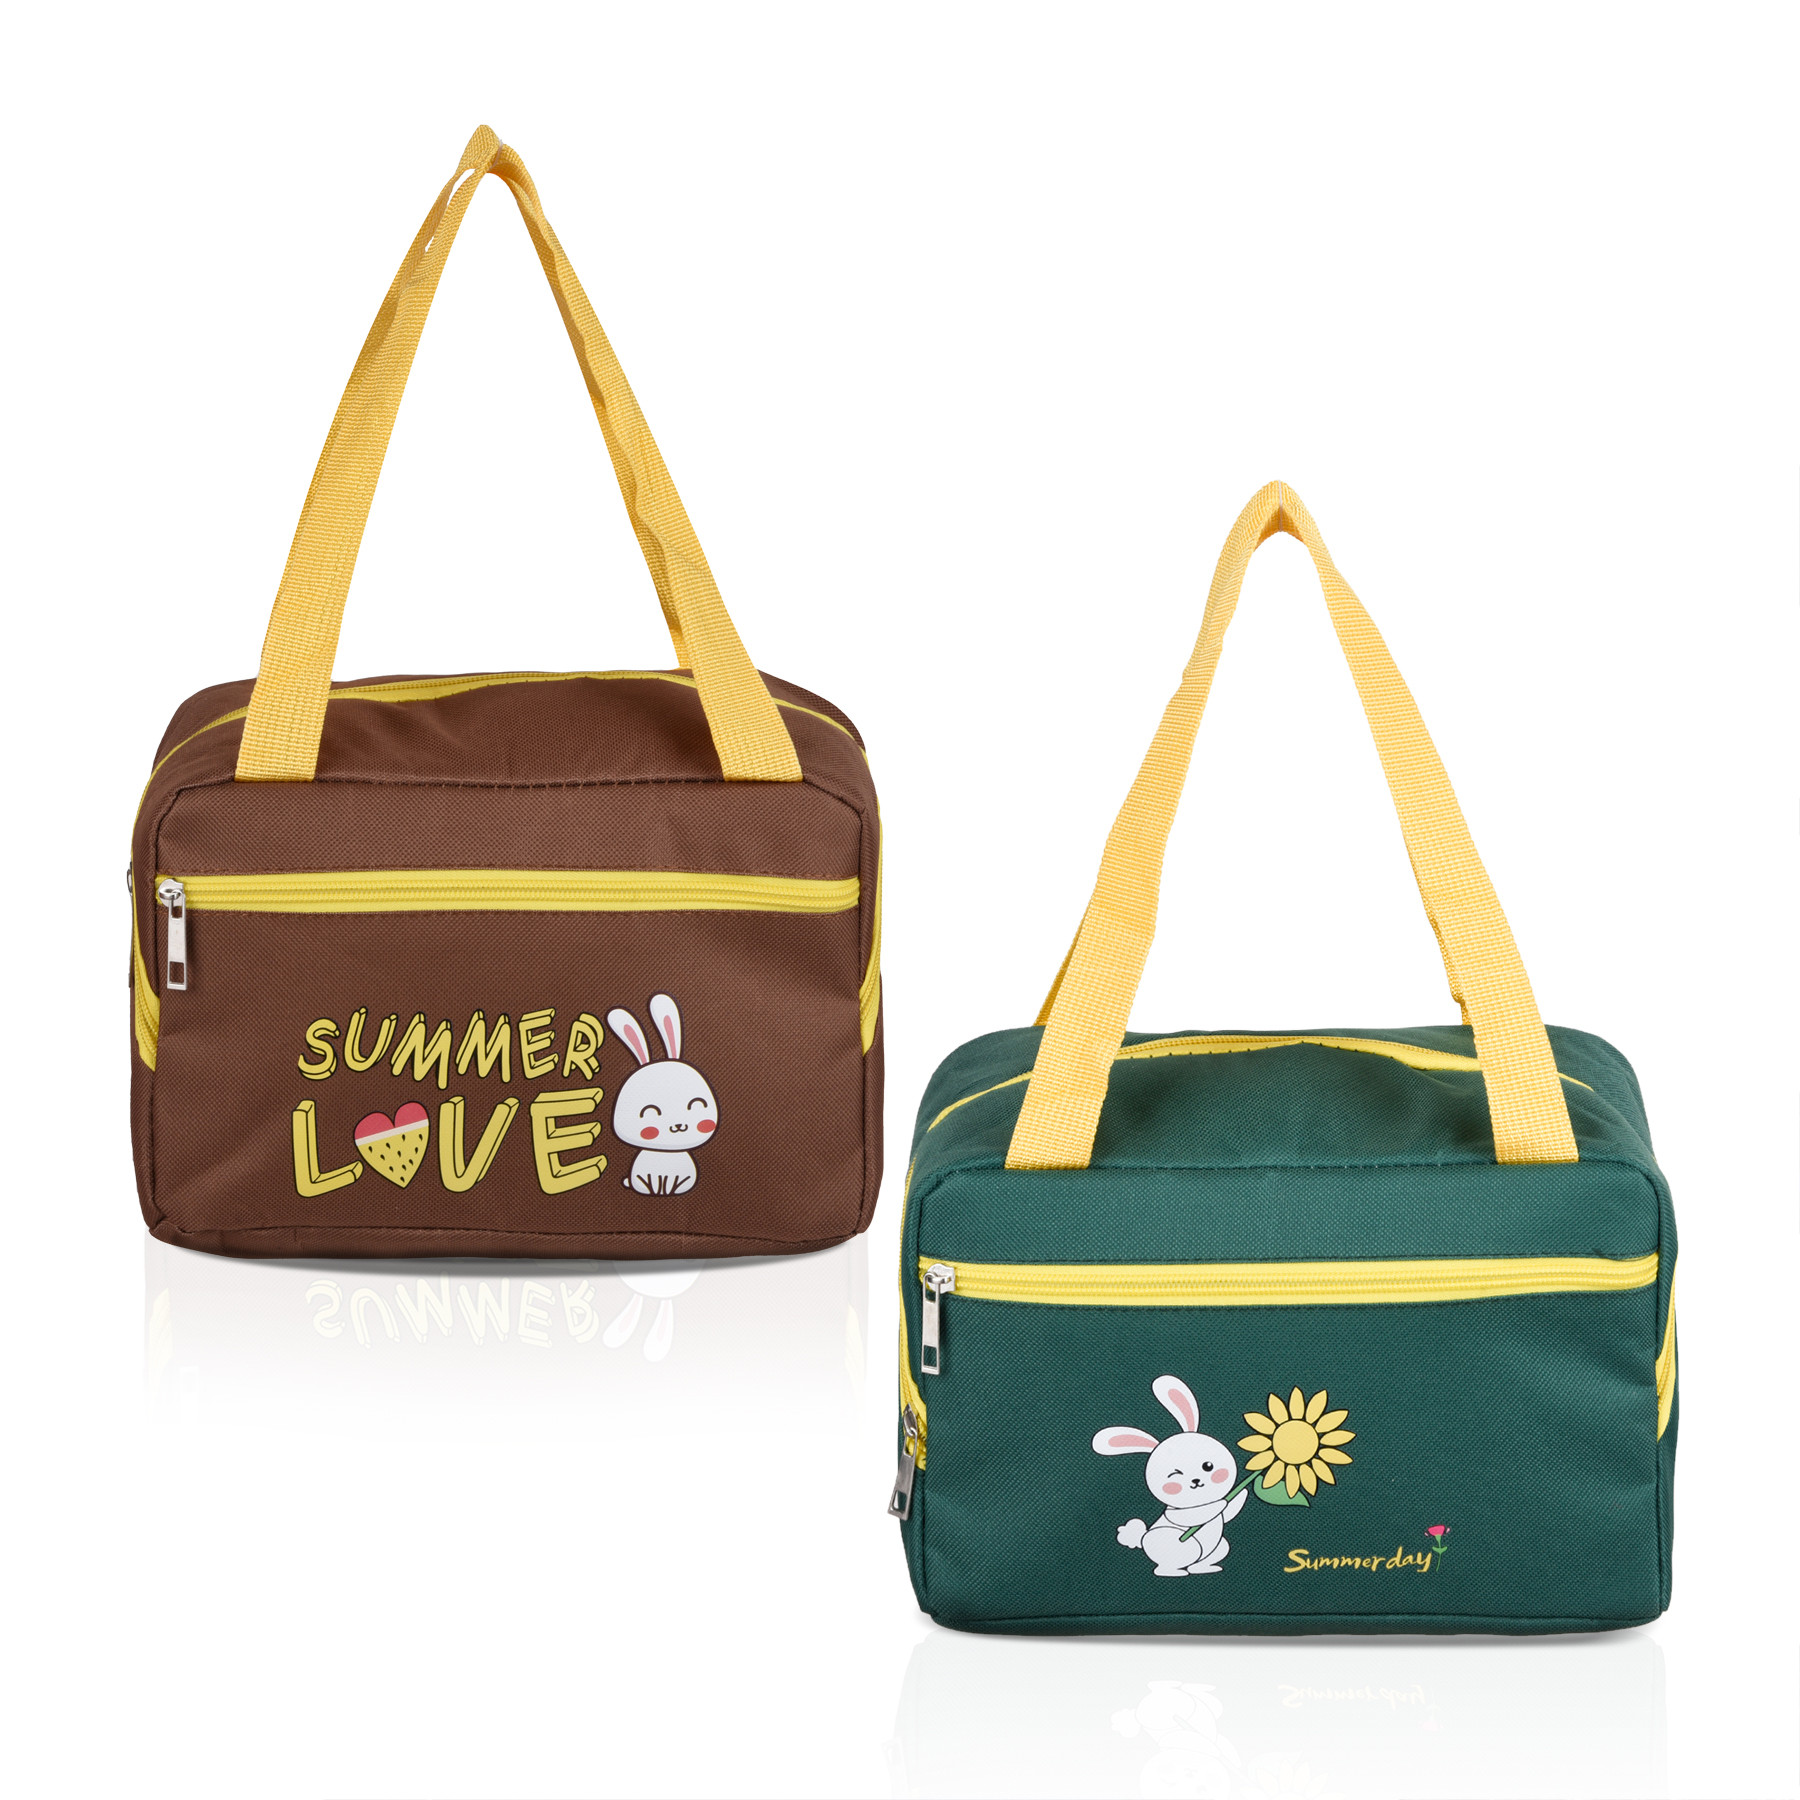 Kuber Industries Pack of 2 Lunch Bag | Insulated Lunch Bag | Lunch Bag for Office | Lunch Bag for Camping with Front Pocket | Waterproof Tiffin Cover with Handle | Summer Rabbit | Brown & Green